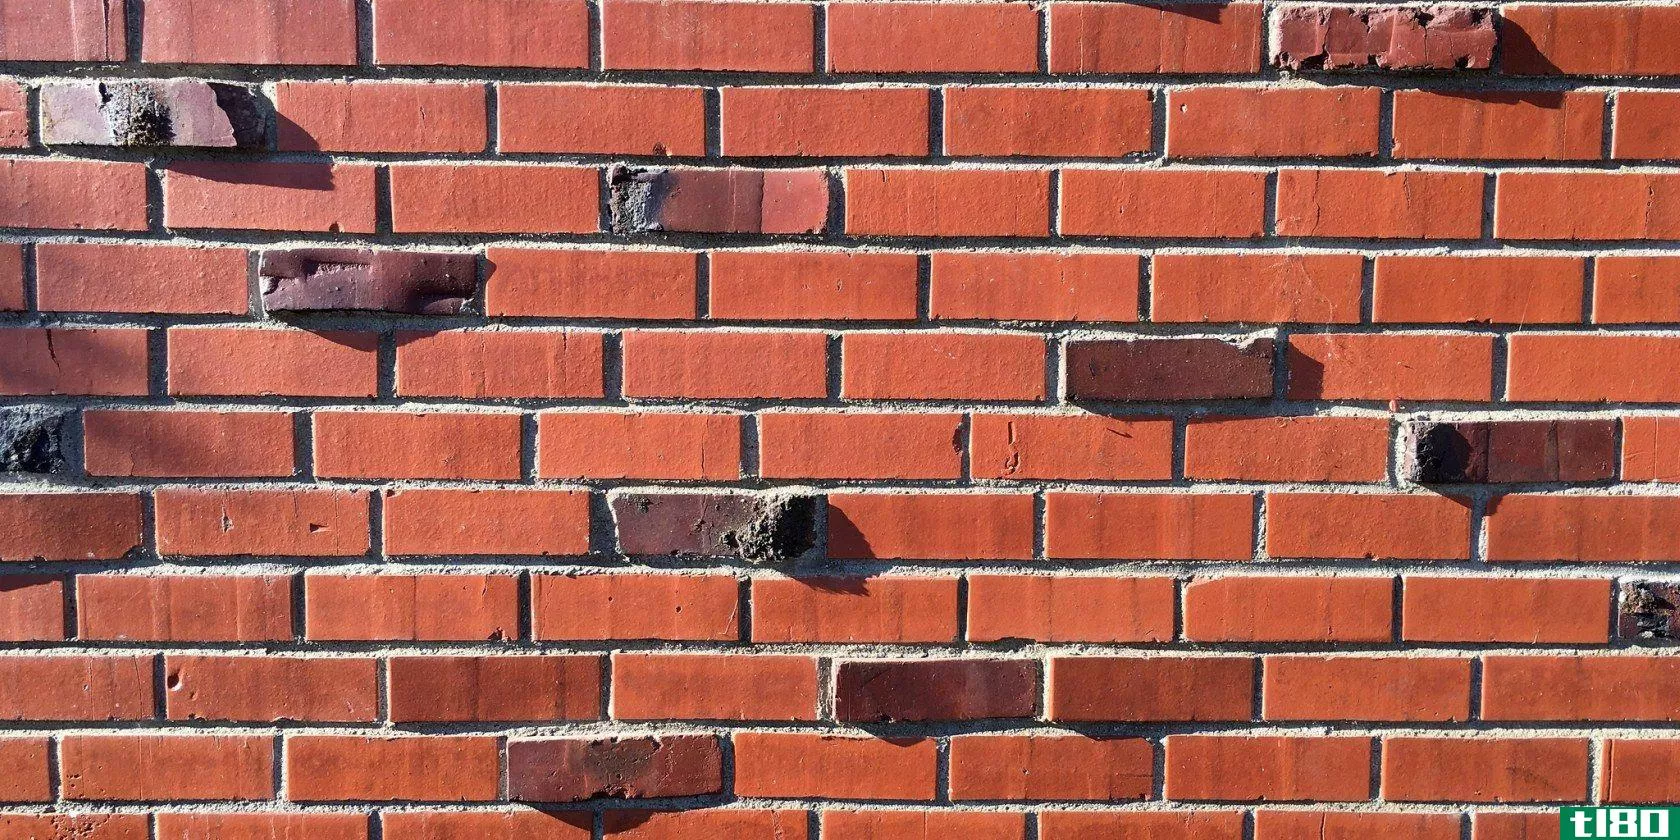 brick-in-the-wall